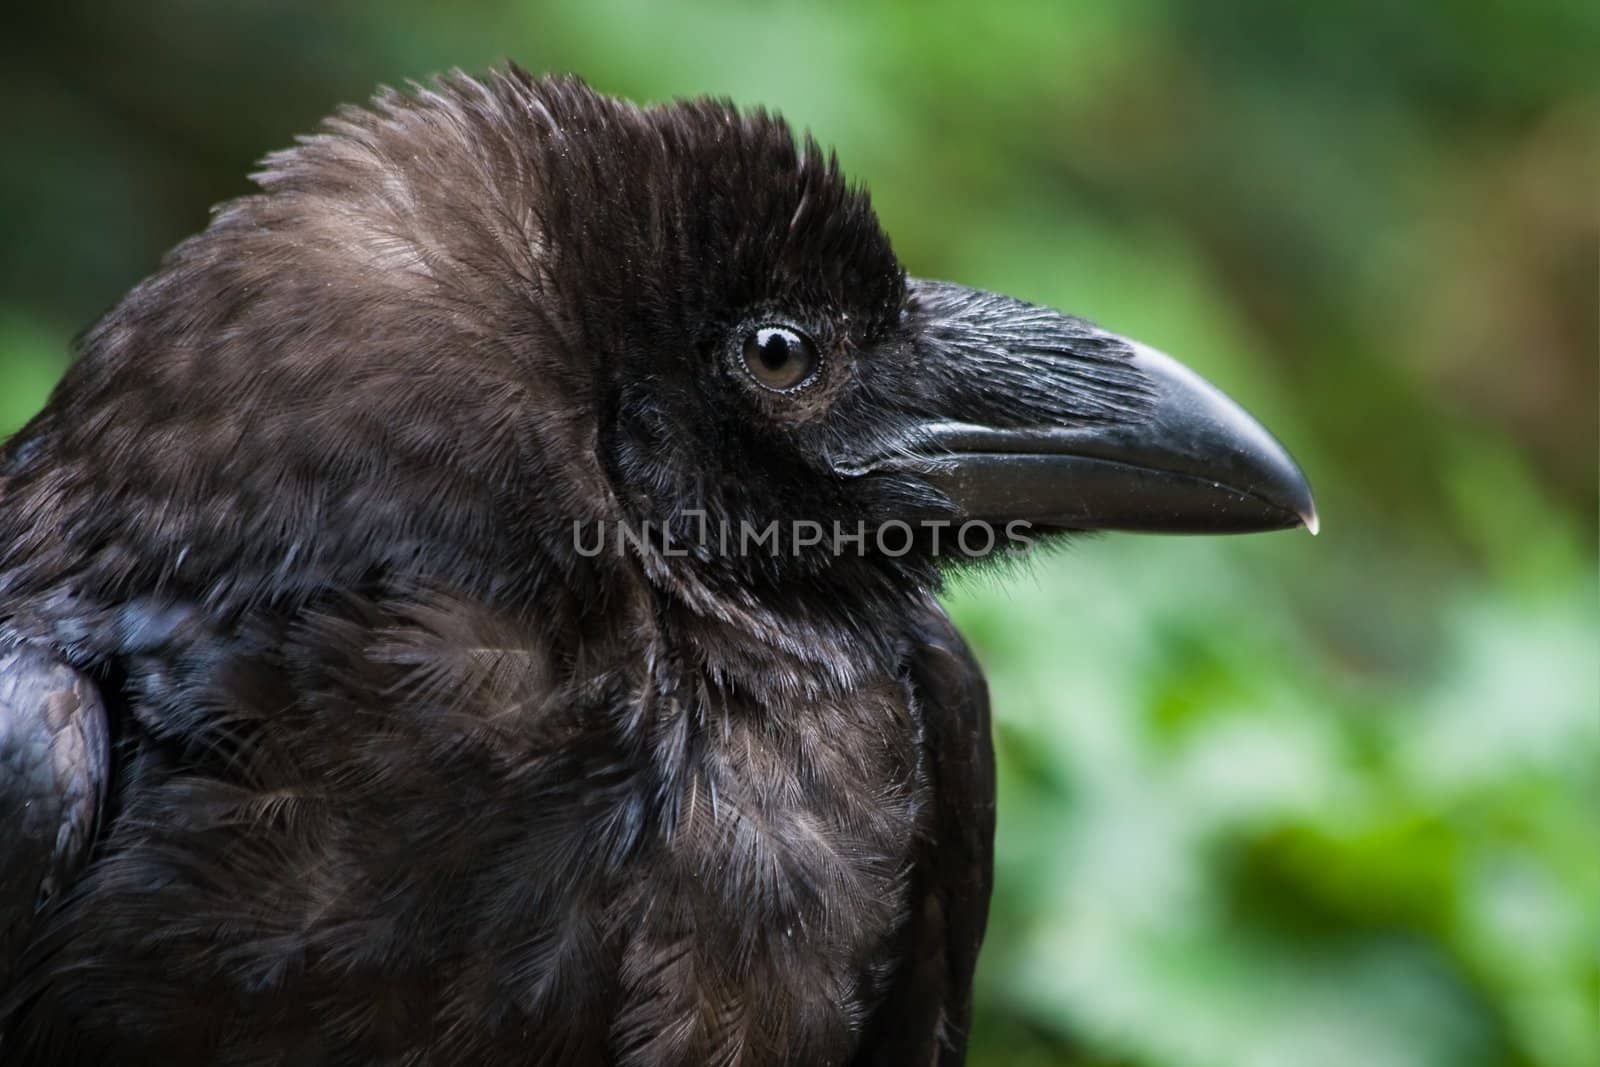 Common raven or Northern raven by Colette